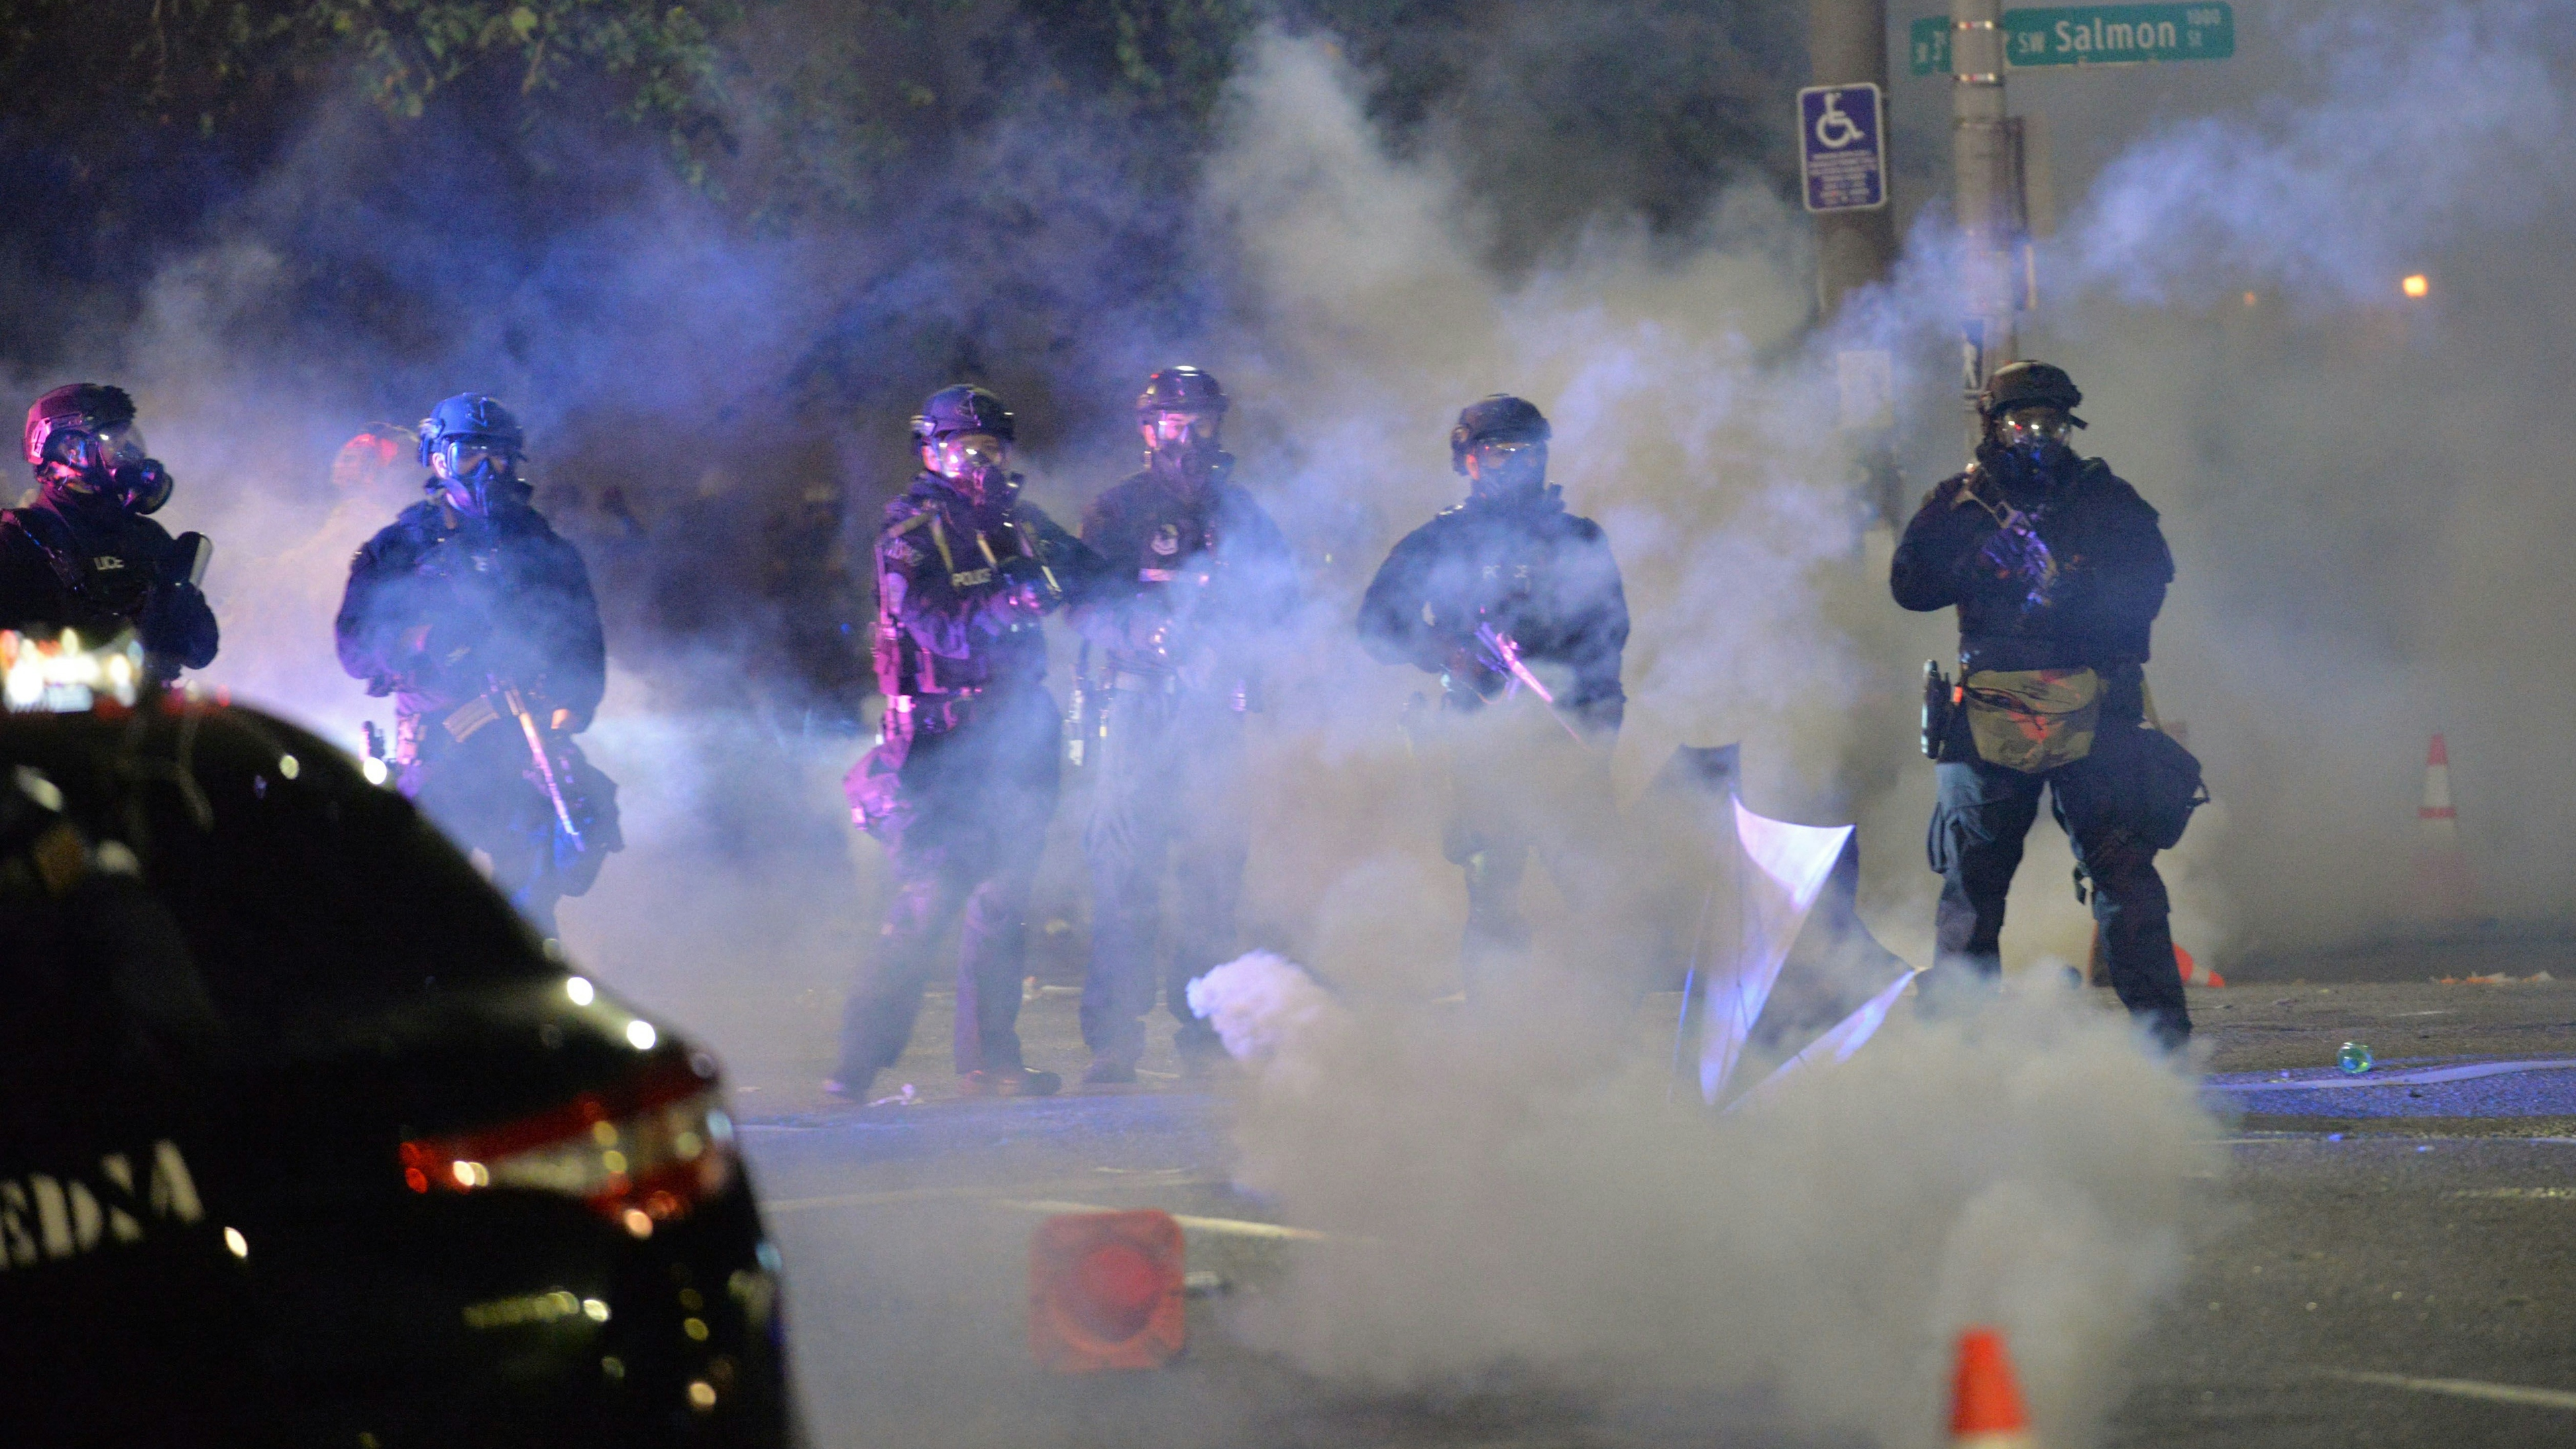 Security personnel stand in a cloud of tear gas in Portland, Oregon early July 26, 2020, as protests continue across the United States.